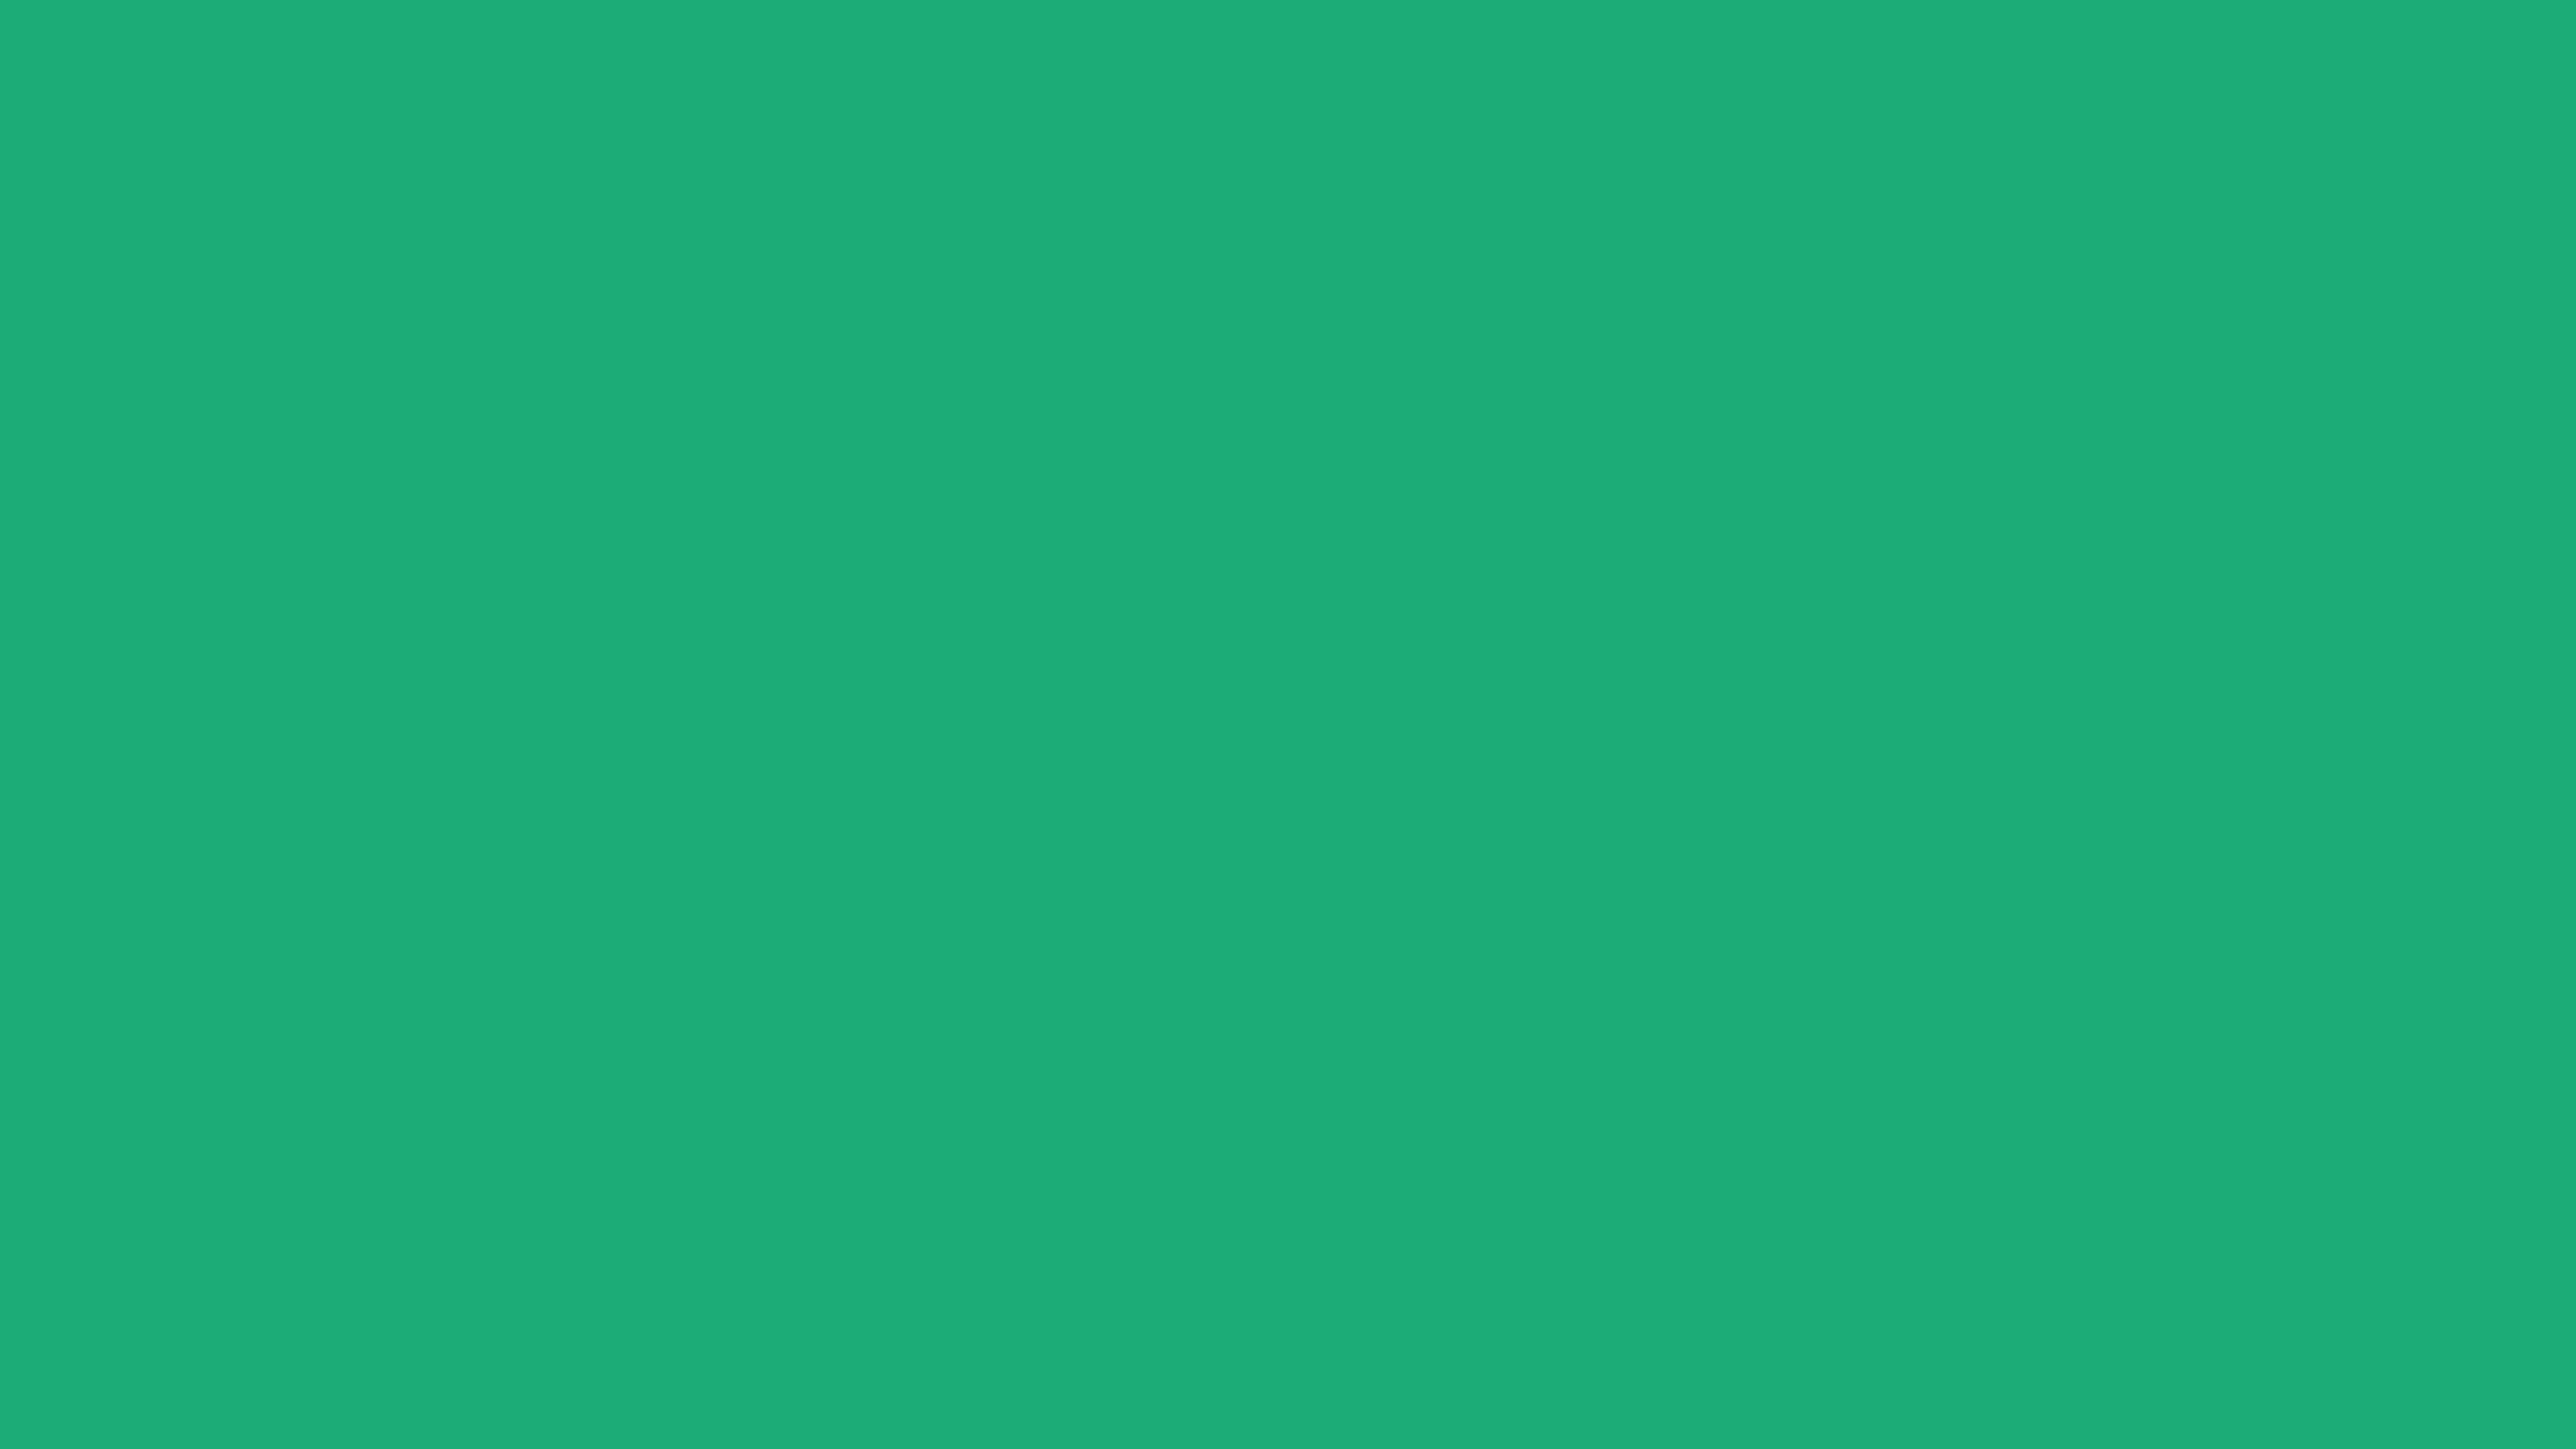 4096x2304 Green Crayola Solid Color Background